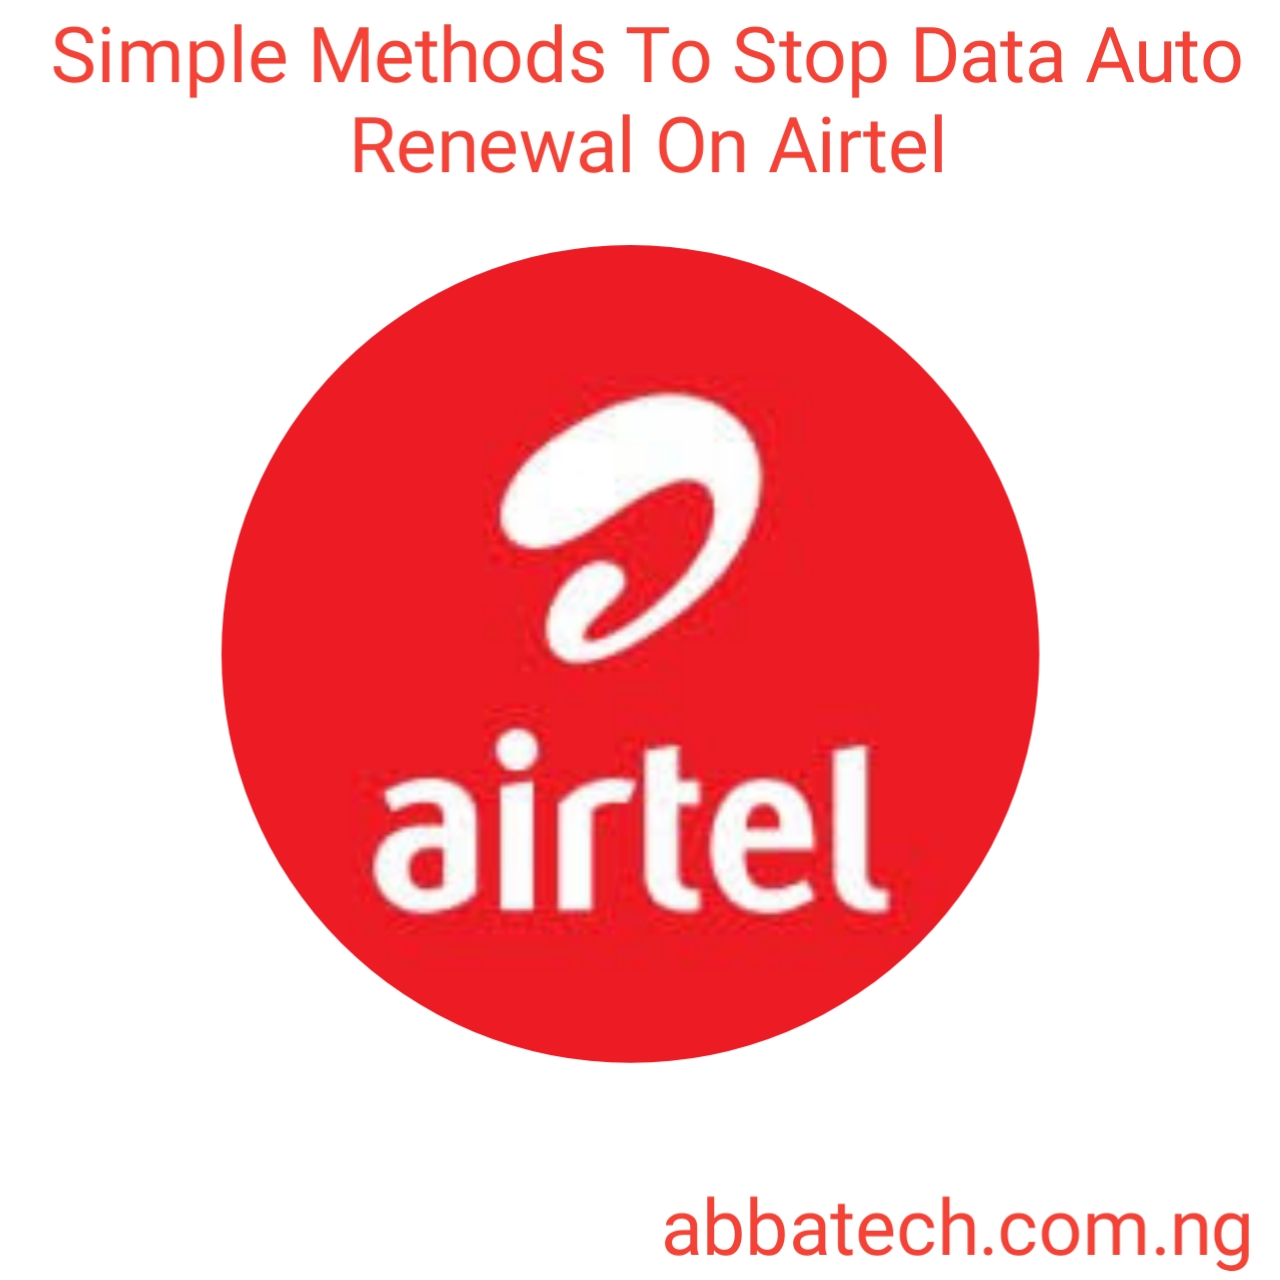 How To Stop Data Auto Renewal On Airtel: A Simple Methods 2022